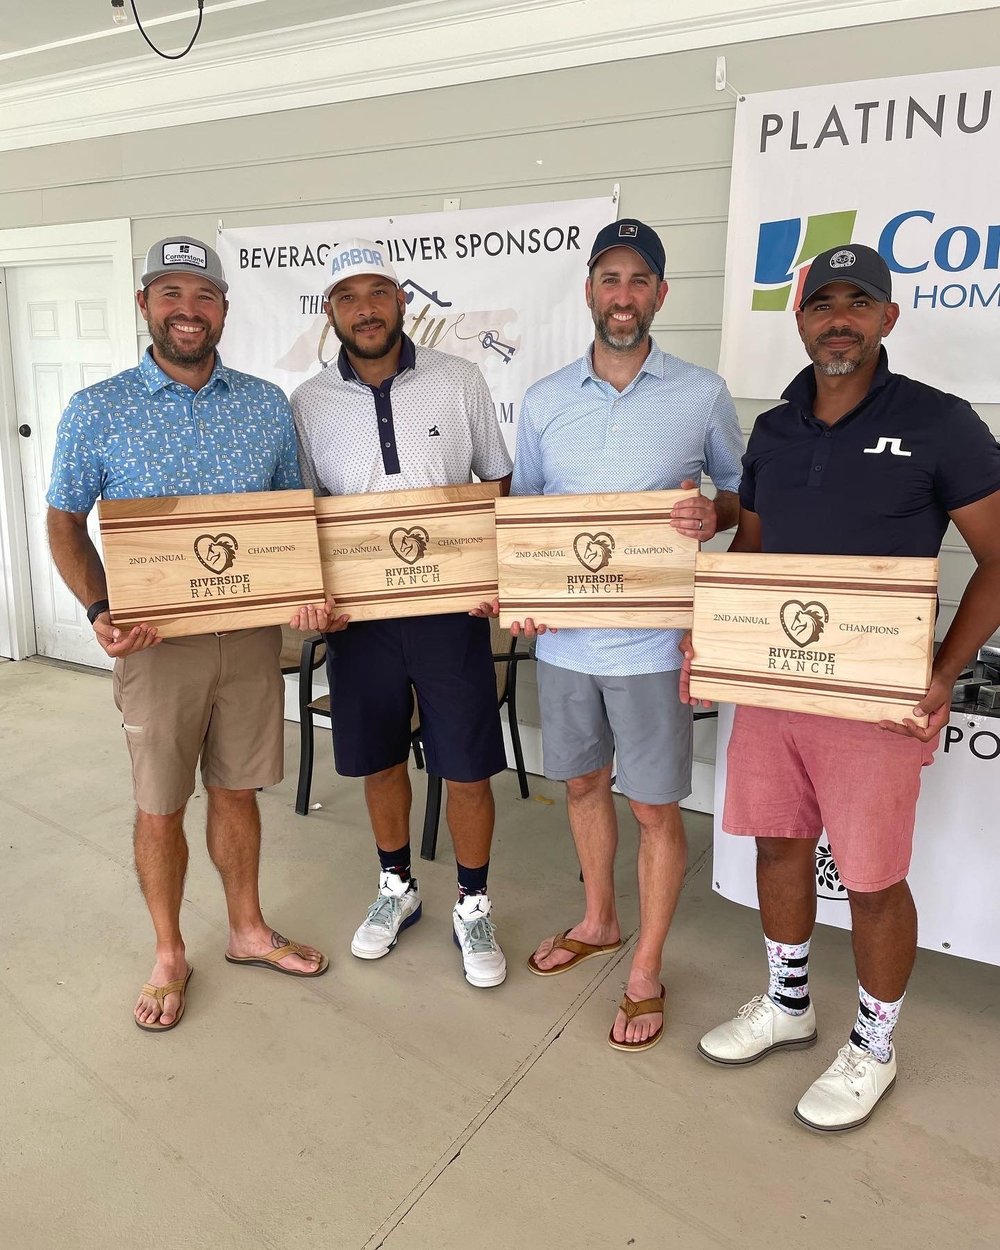 A group of golfers smiling and posing with Riverside Ranch plaques. (Copy)